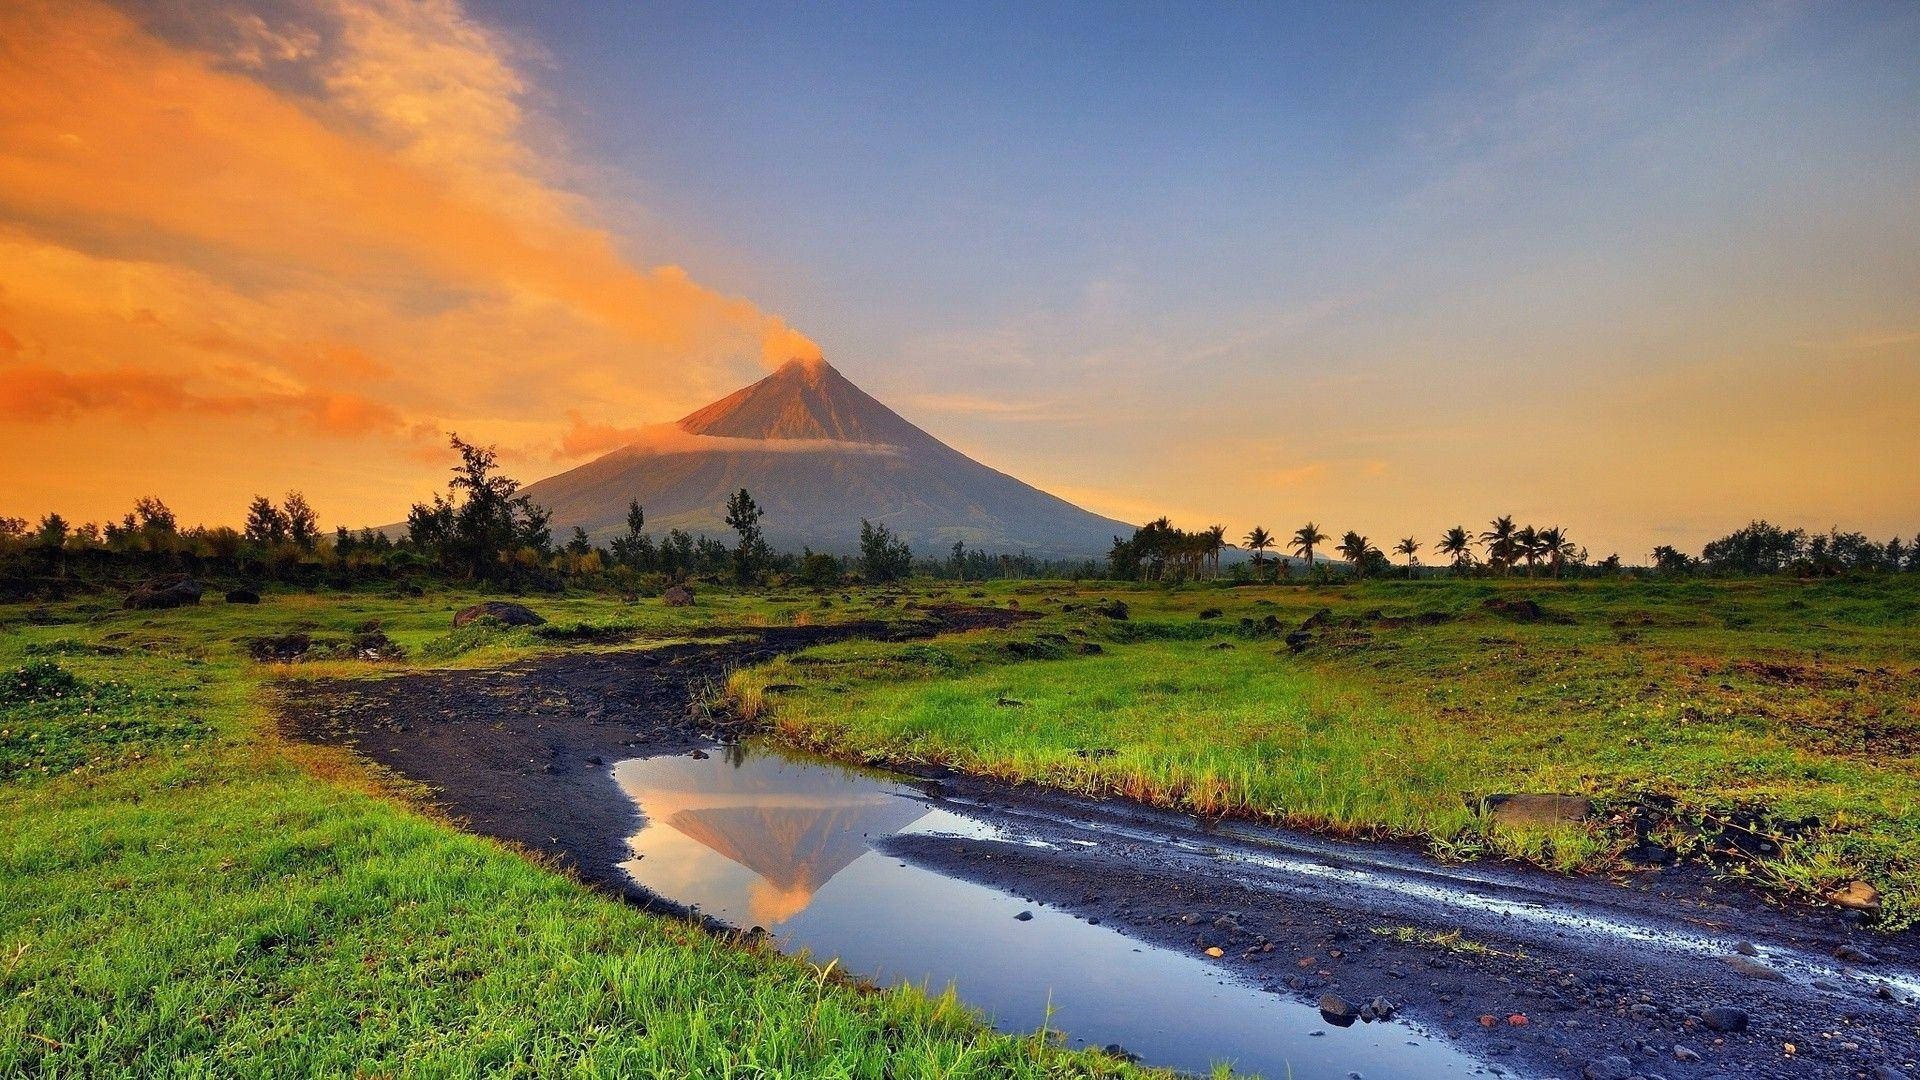 Mayon Volcano Of The Philippines